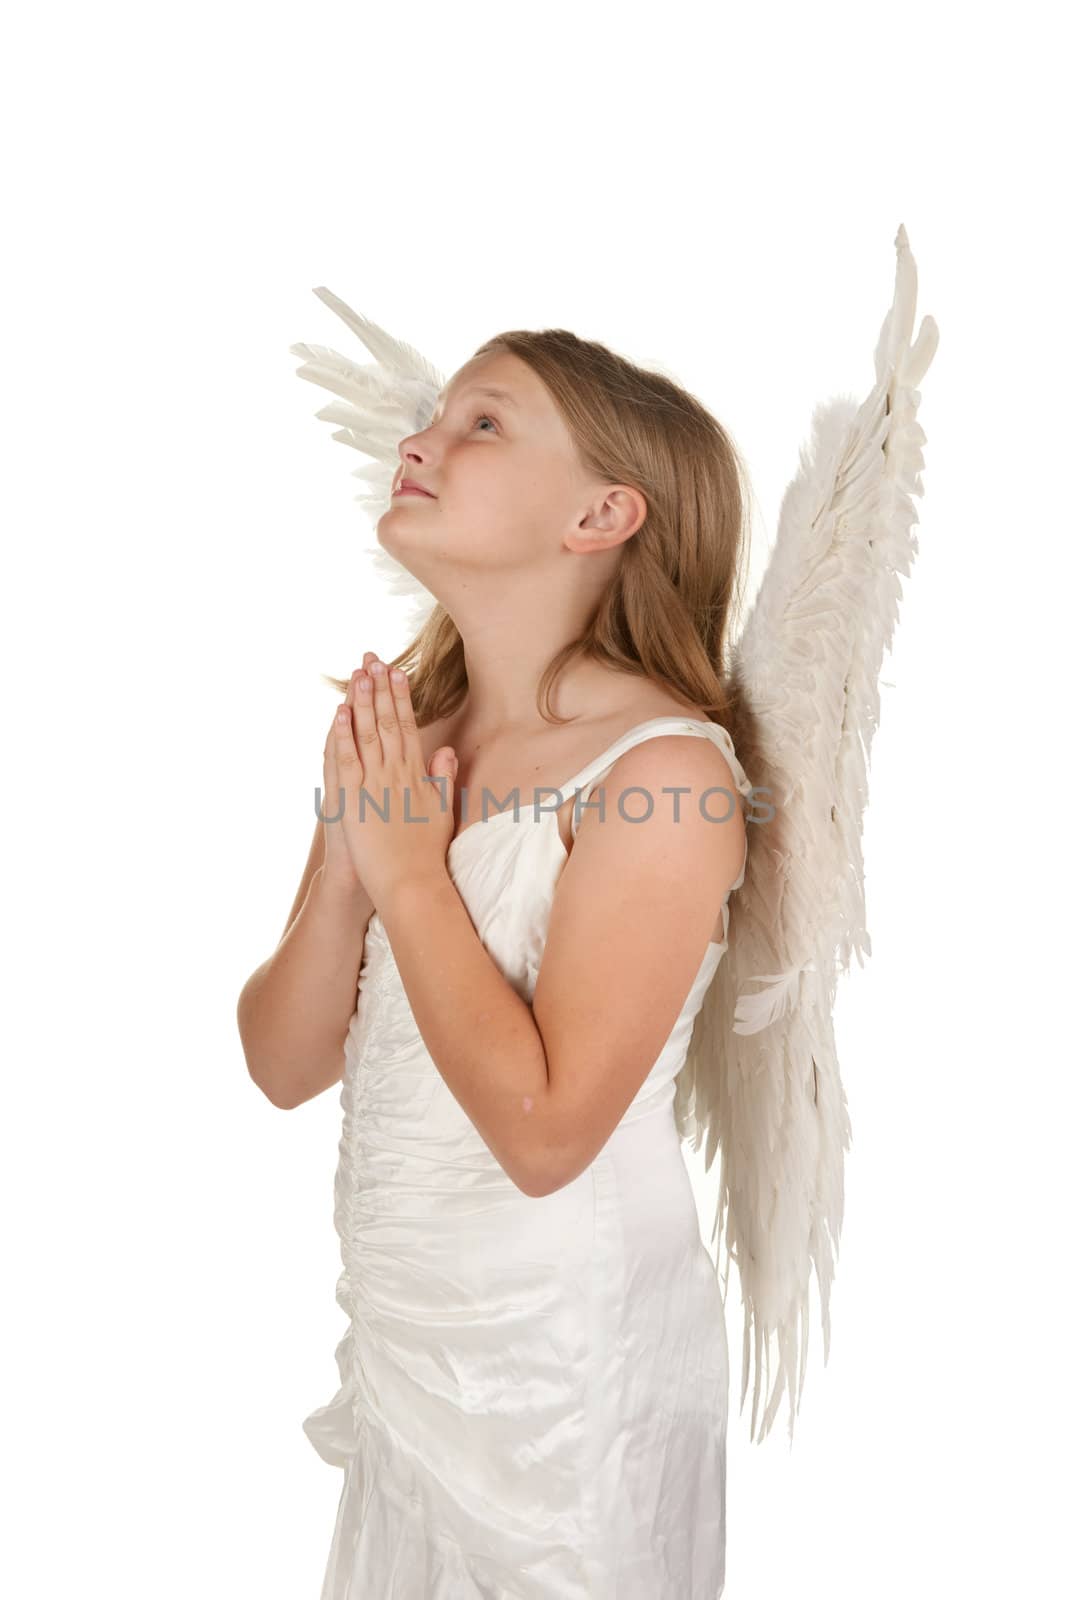 young angel praying on white background by clearviewstock